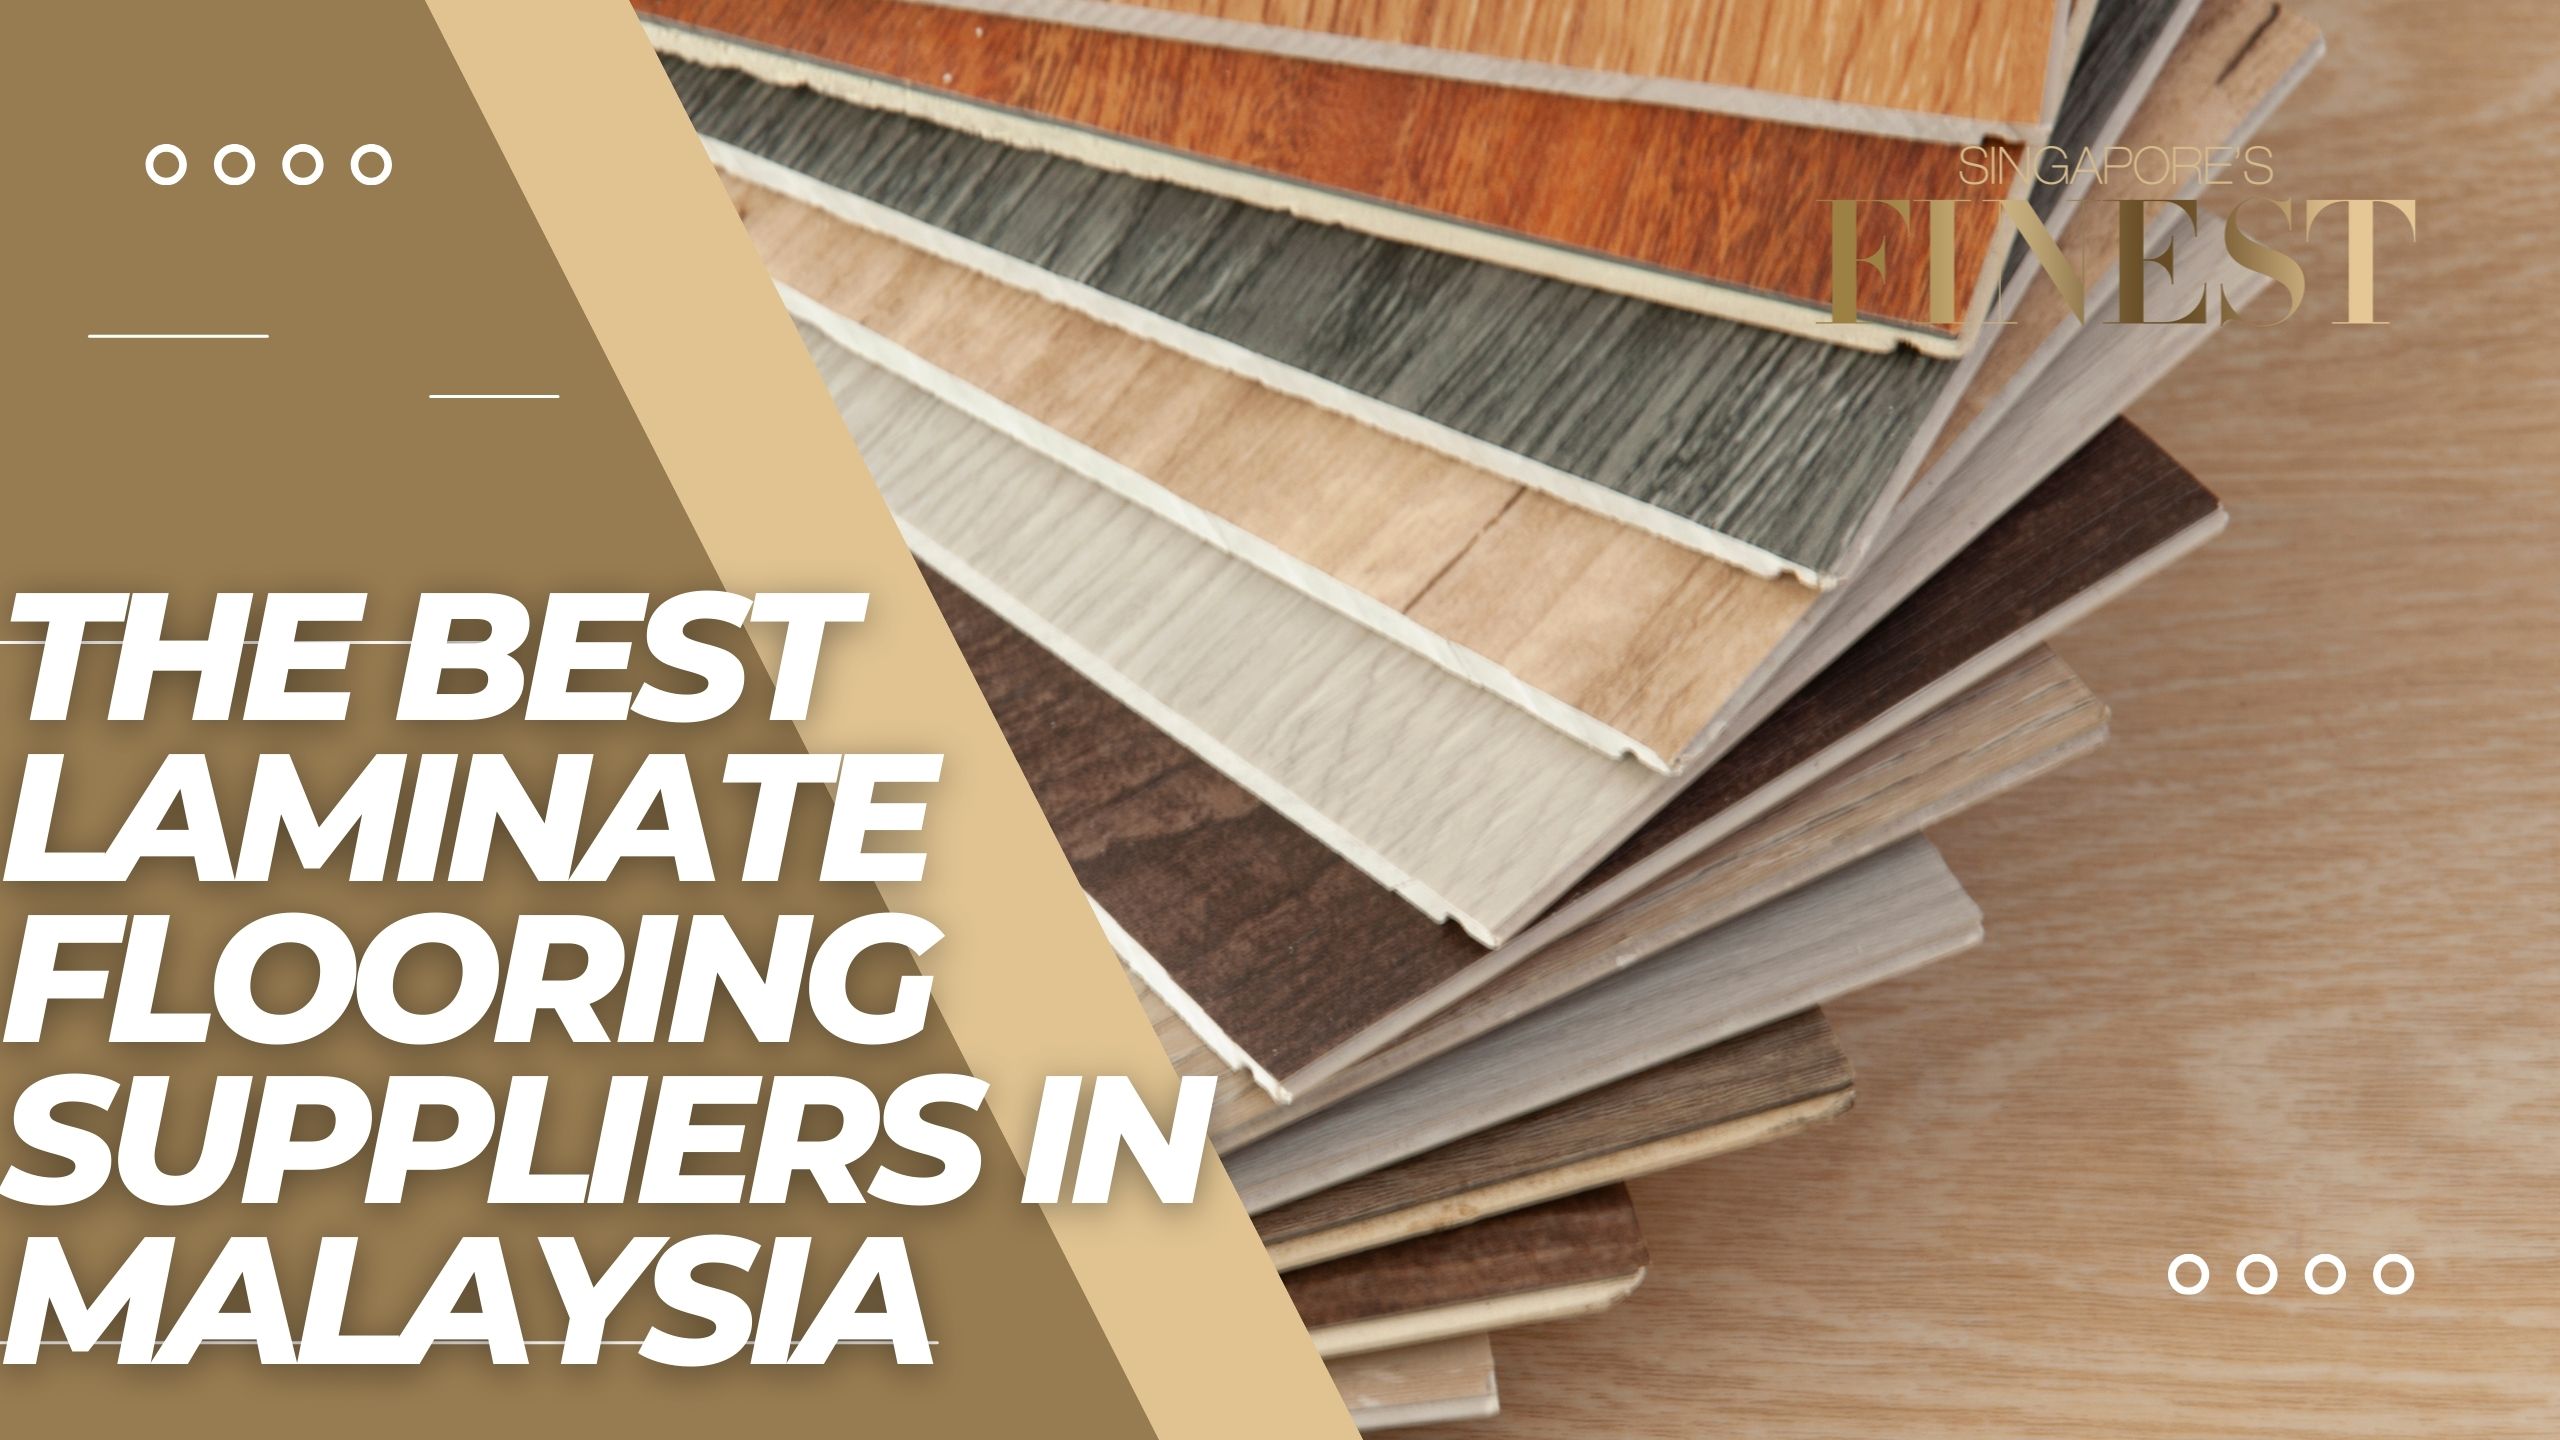 The Finest Laminate Flooring Suppliers in Malaysia